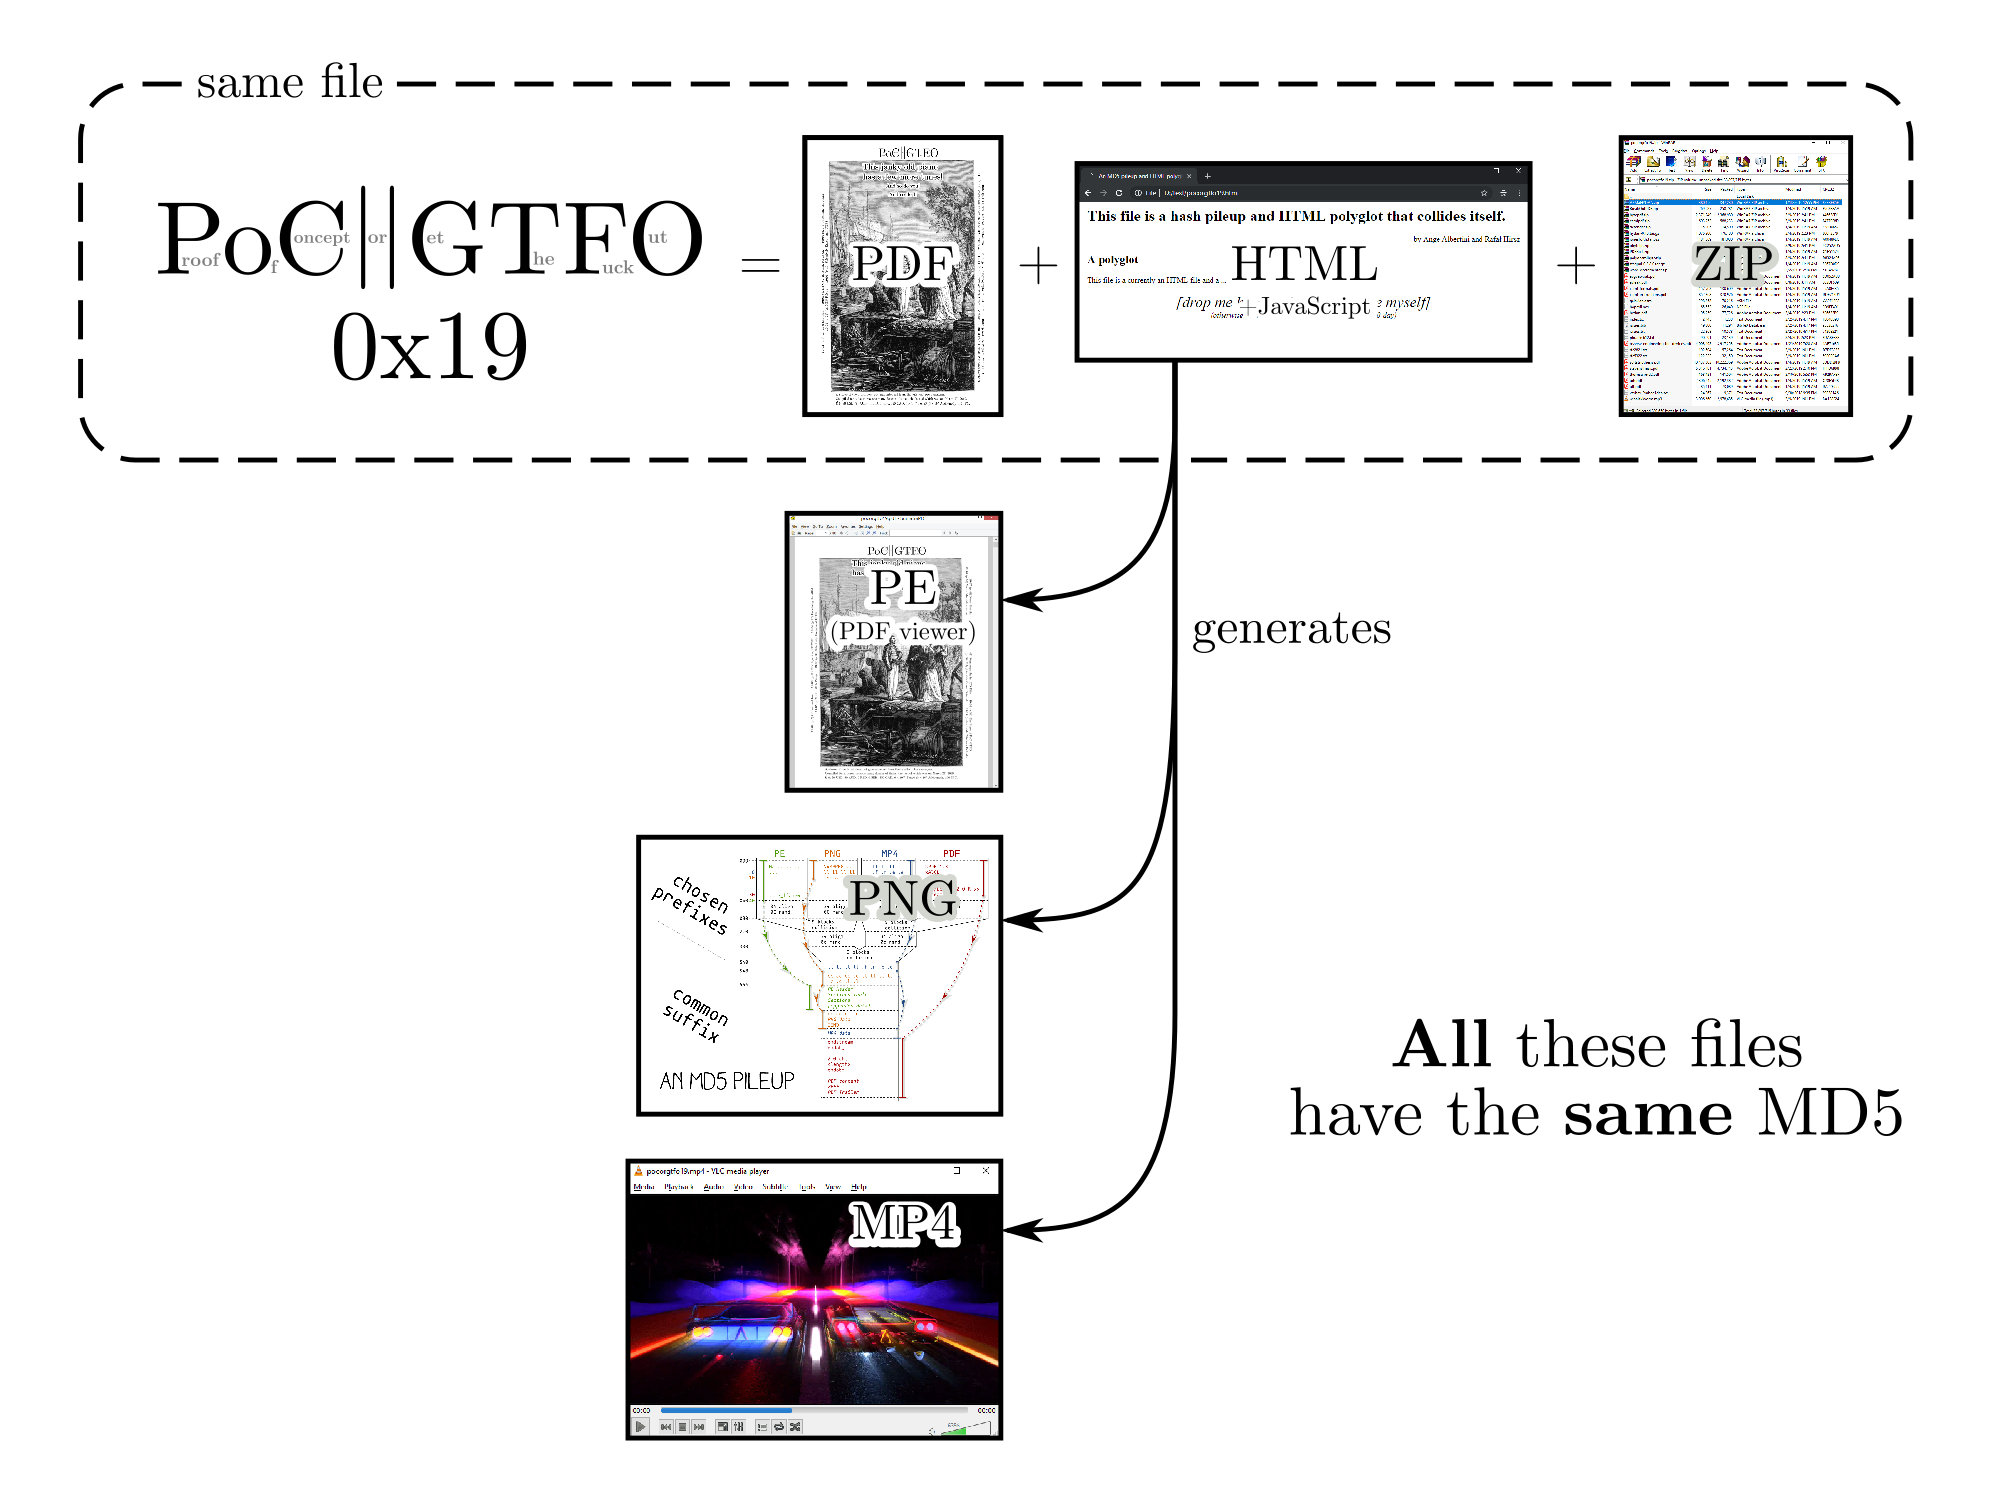 Diagram of the issue 19 of PoC or GTFO, a polyglot and pileup.